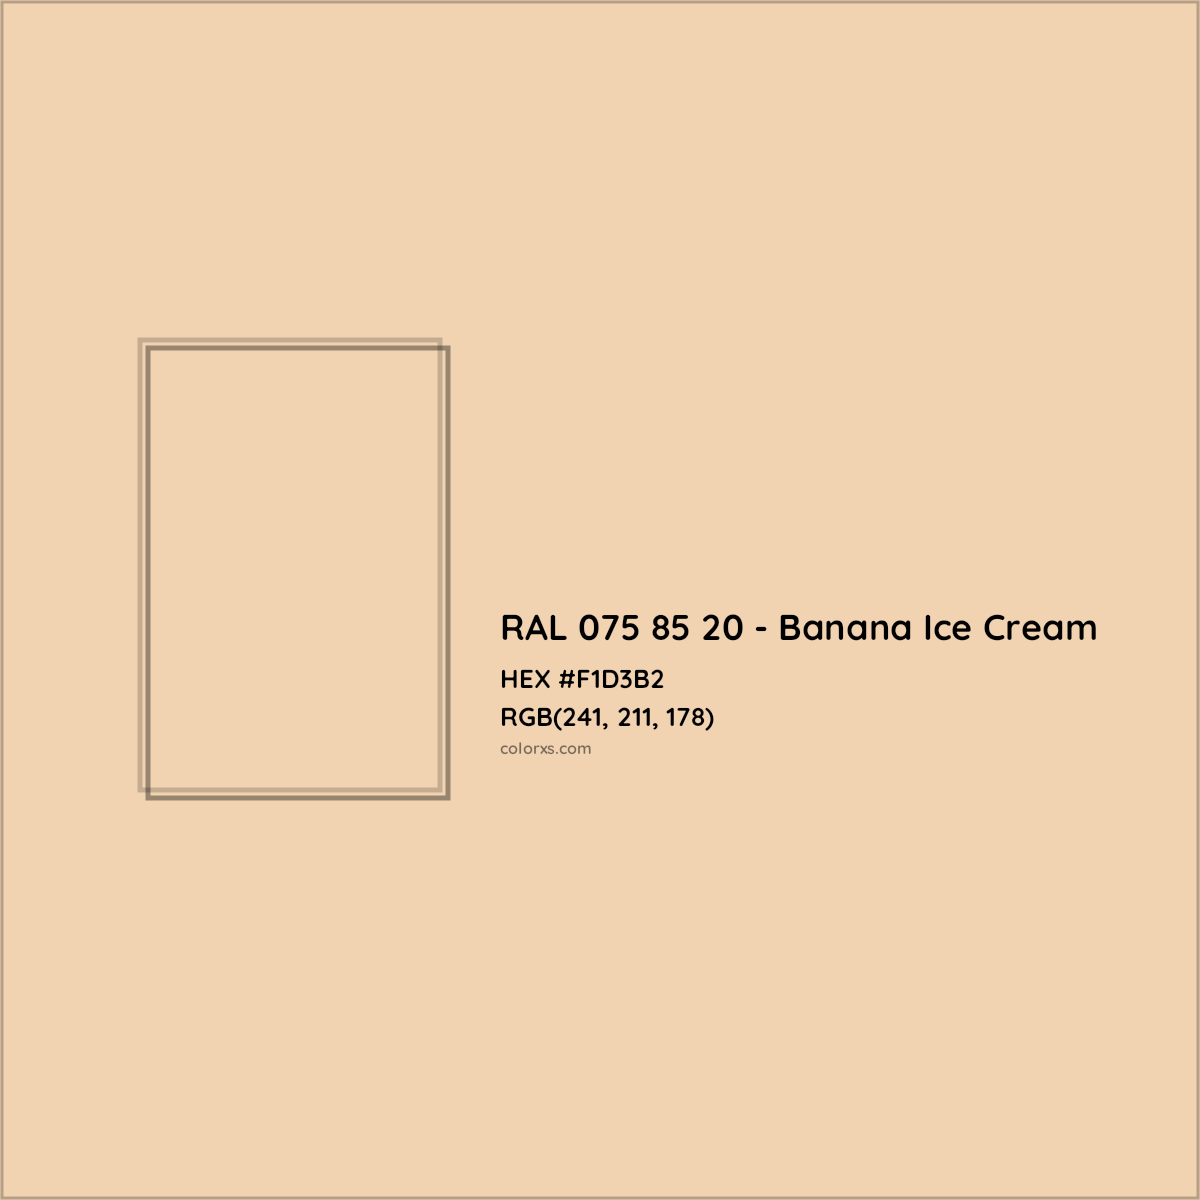 HEX #F1D3B2 RAL 075 85 20 - Banana Ice Cream CMS RAL Design - Color Code